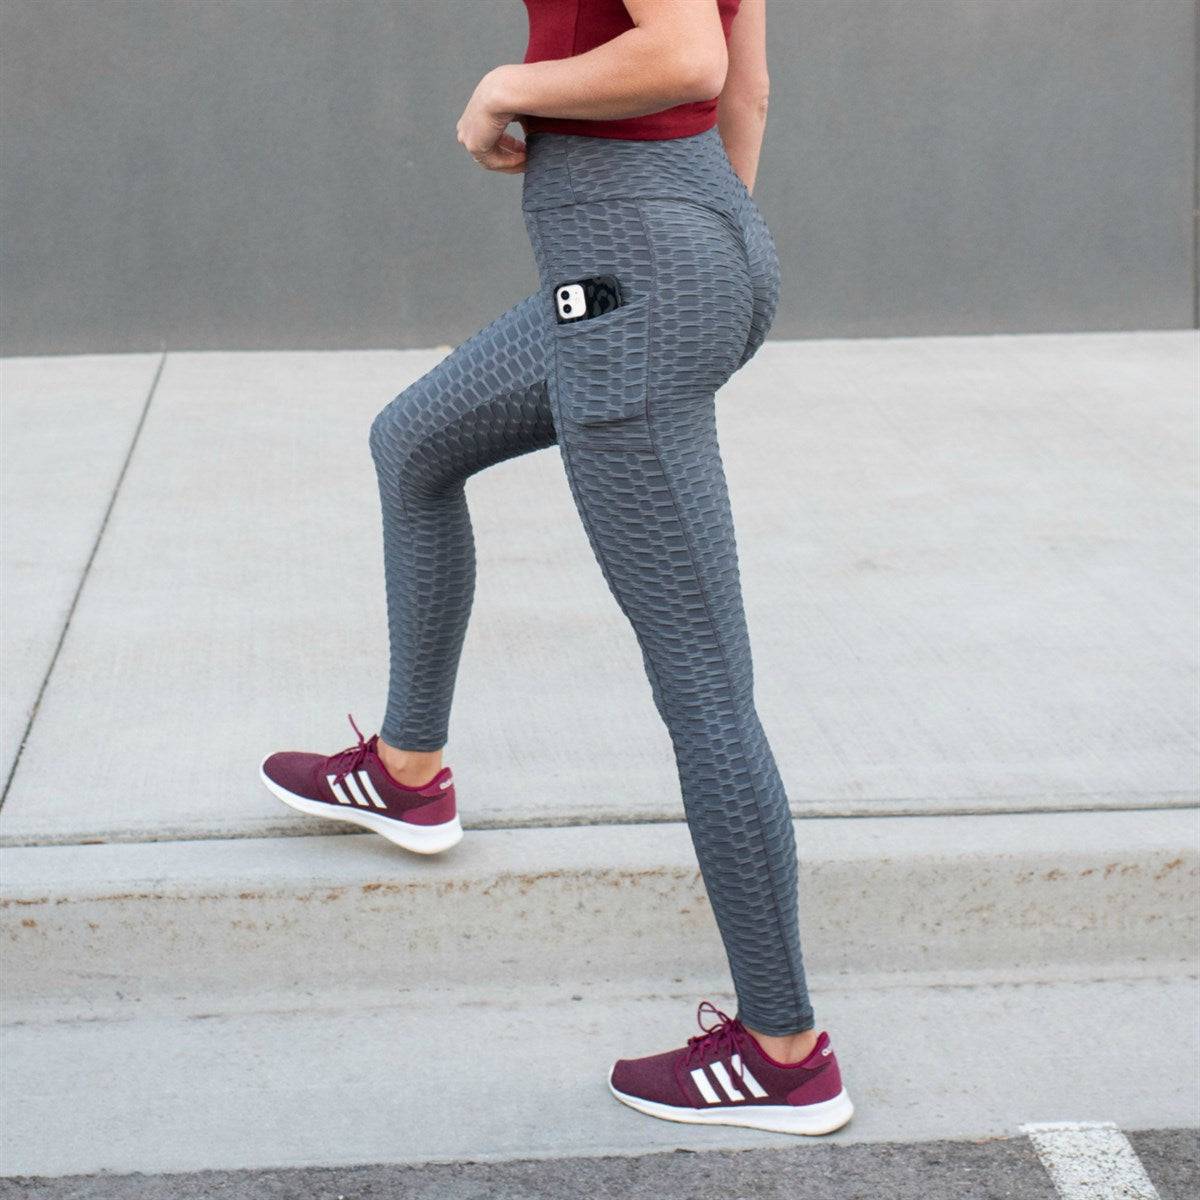 UNMARKED - These leggings hide the appearance of cellulite